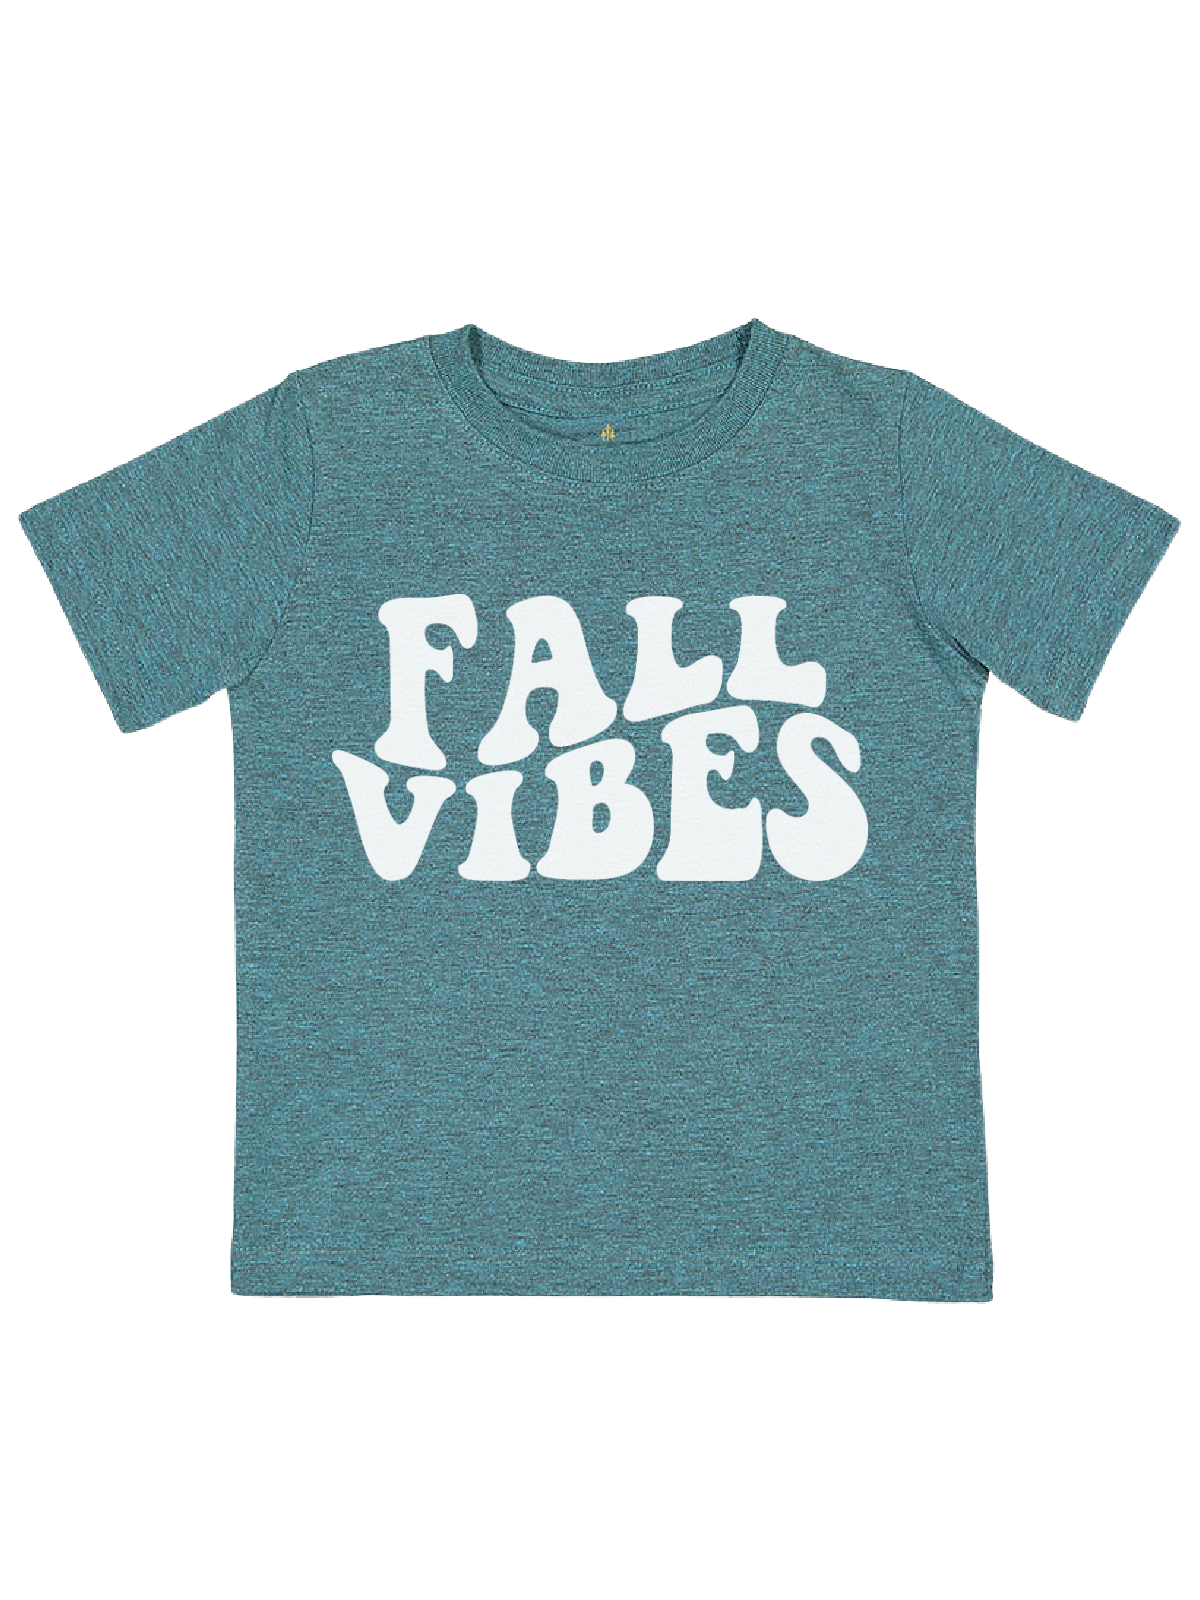 Fall Vibes Kids Shirt in Surf Blackout